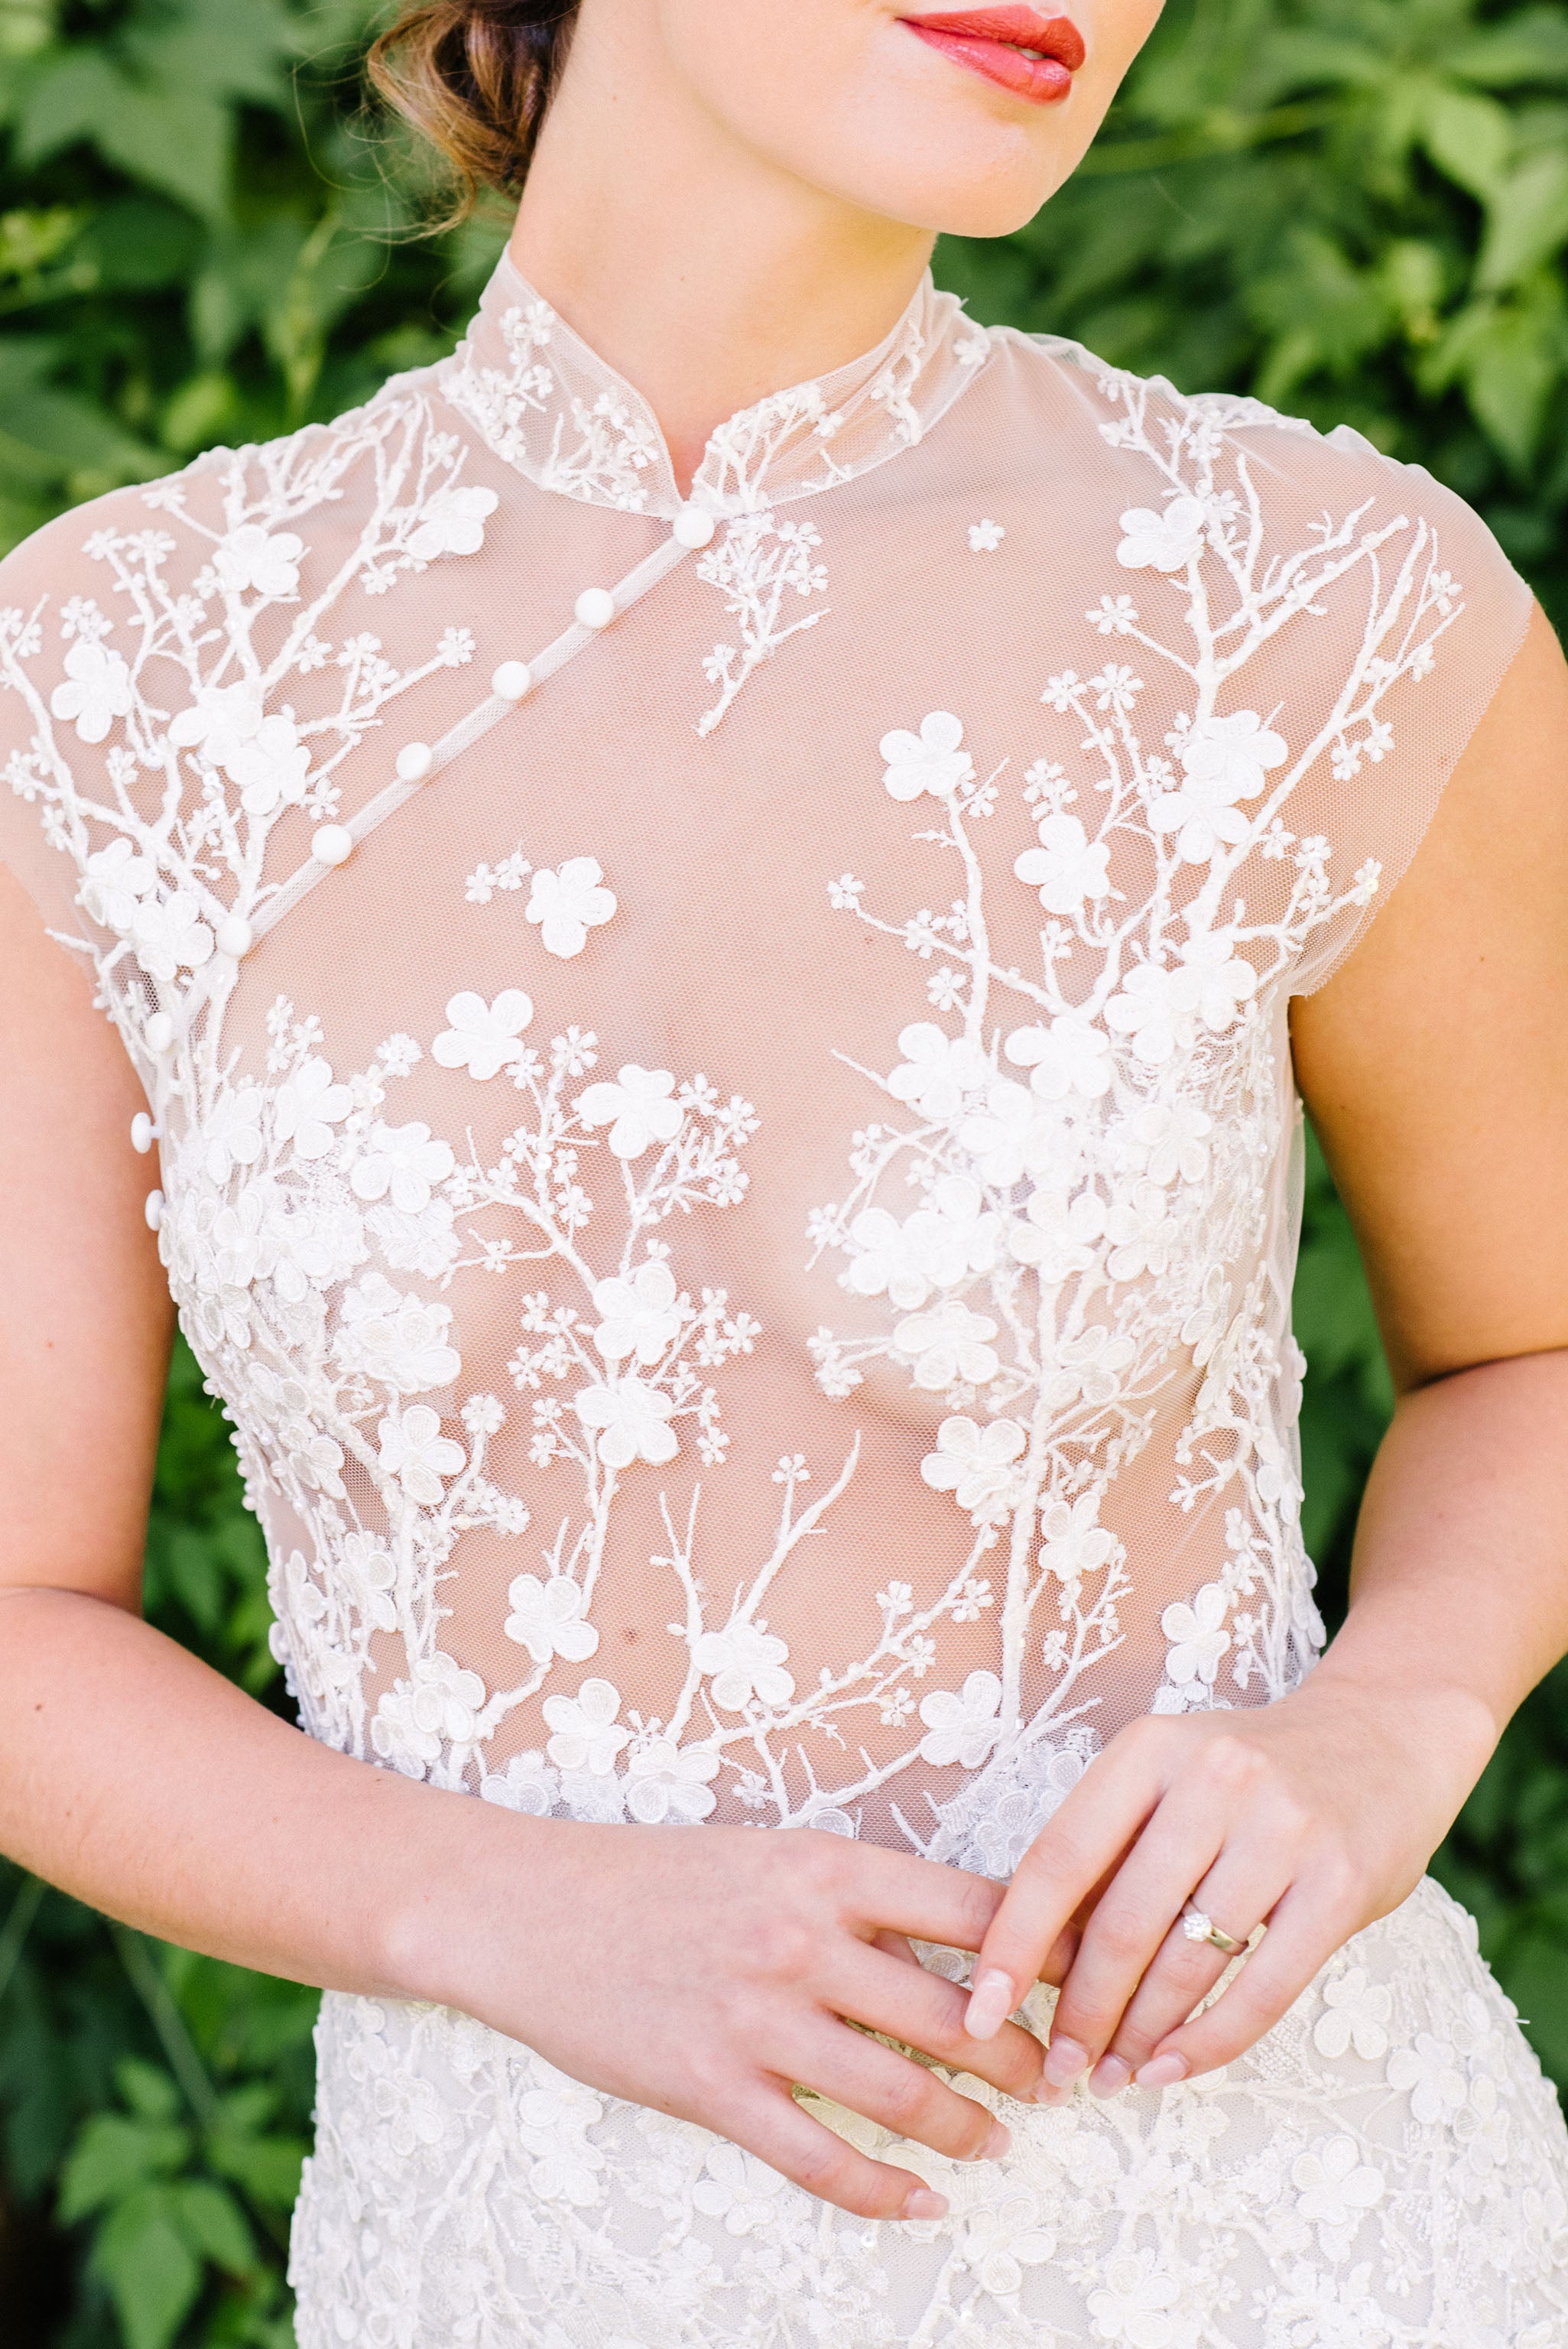 illusion lace top wedding dress with floral details